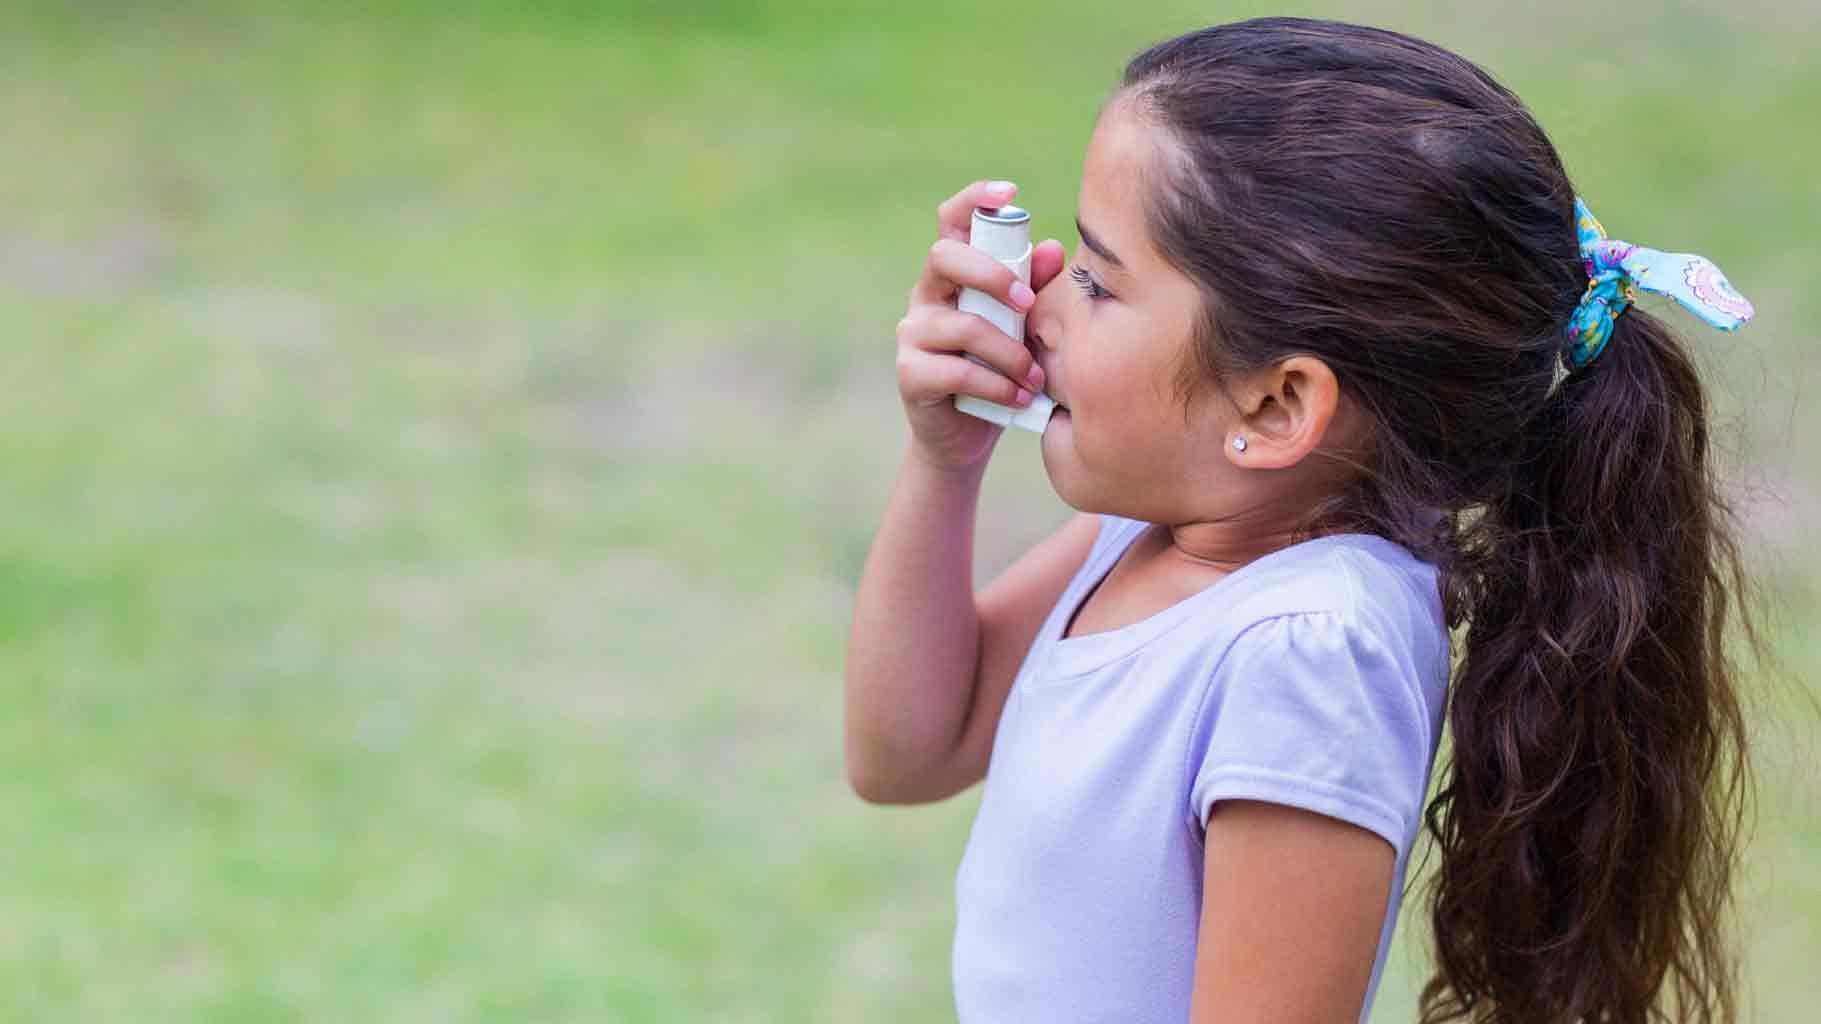 4 million children are affected by asthma annually due to pollution from vehicles.